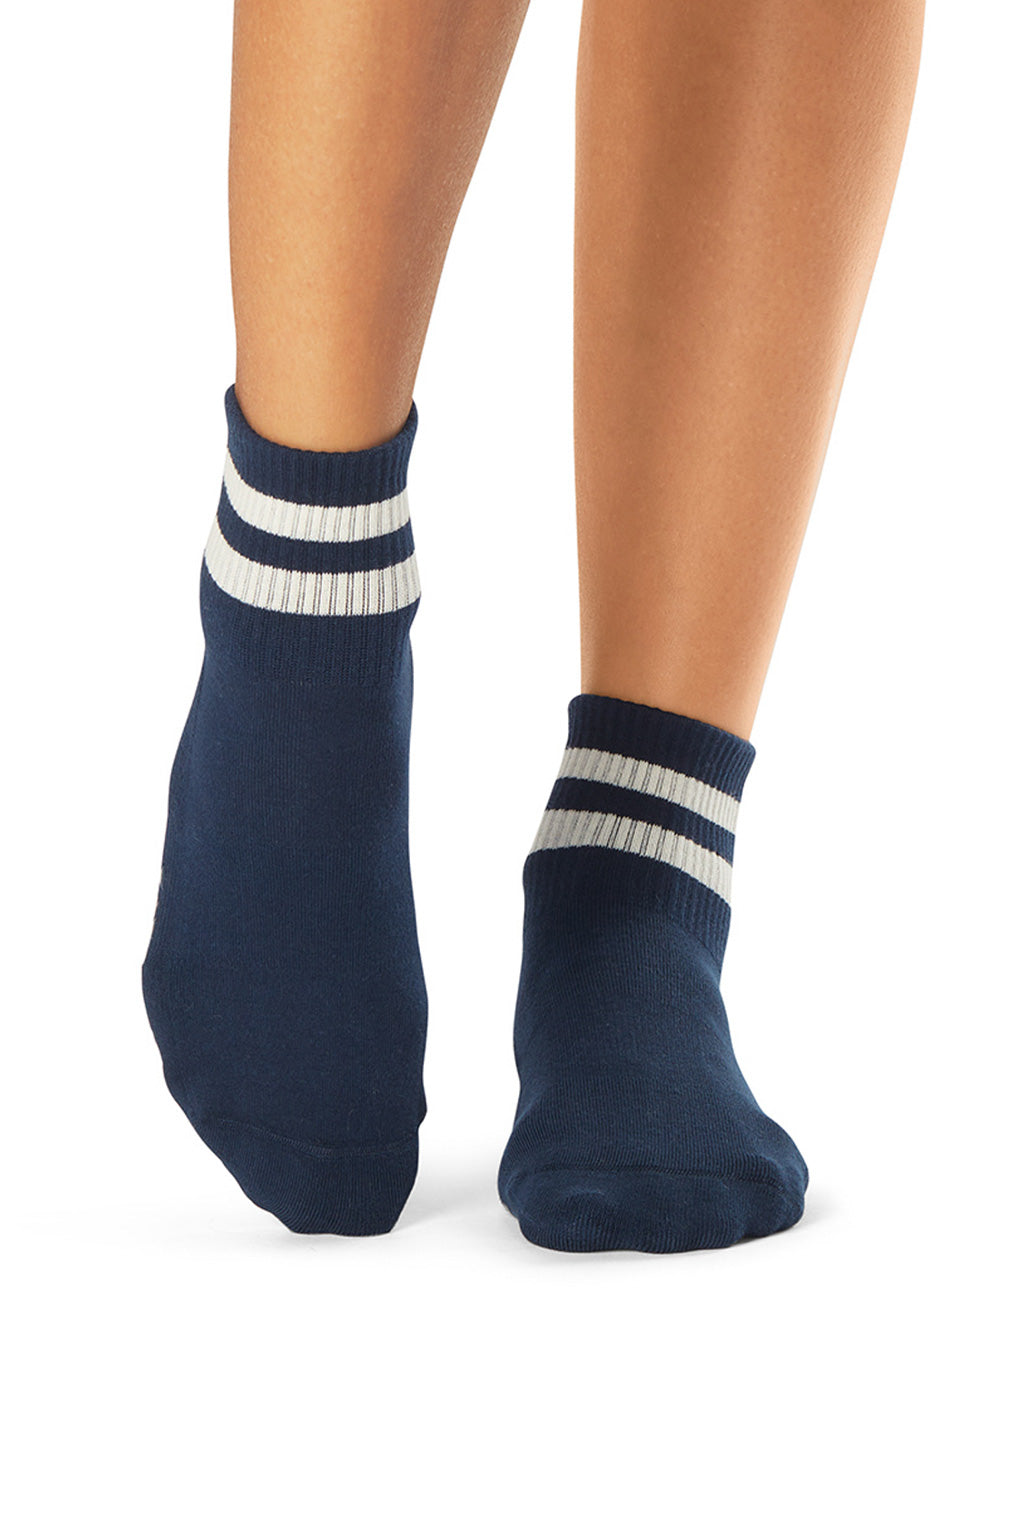 High density navy rubber grip activewear socks for yoga, pilates, gym, and exercise from Tavi featured by sustainable women's activewear brand Jilla Active   